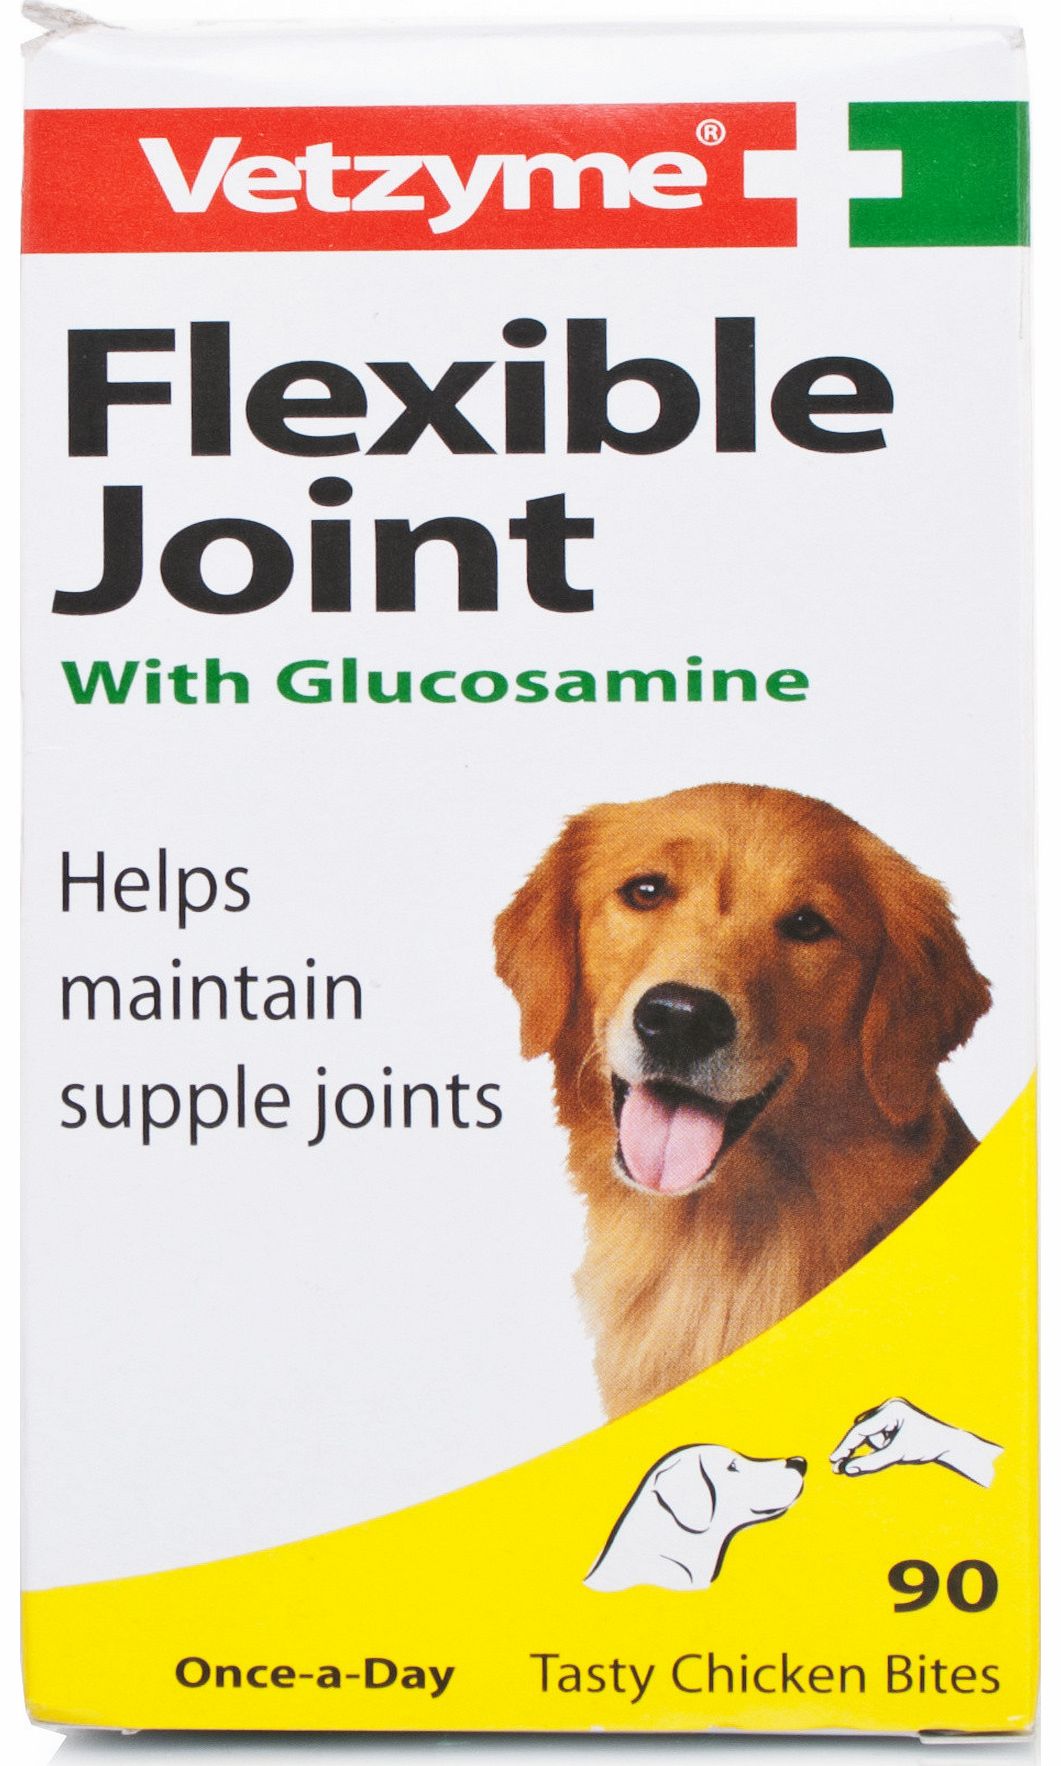 Flexible Joint With Glucosamine